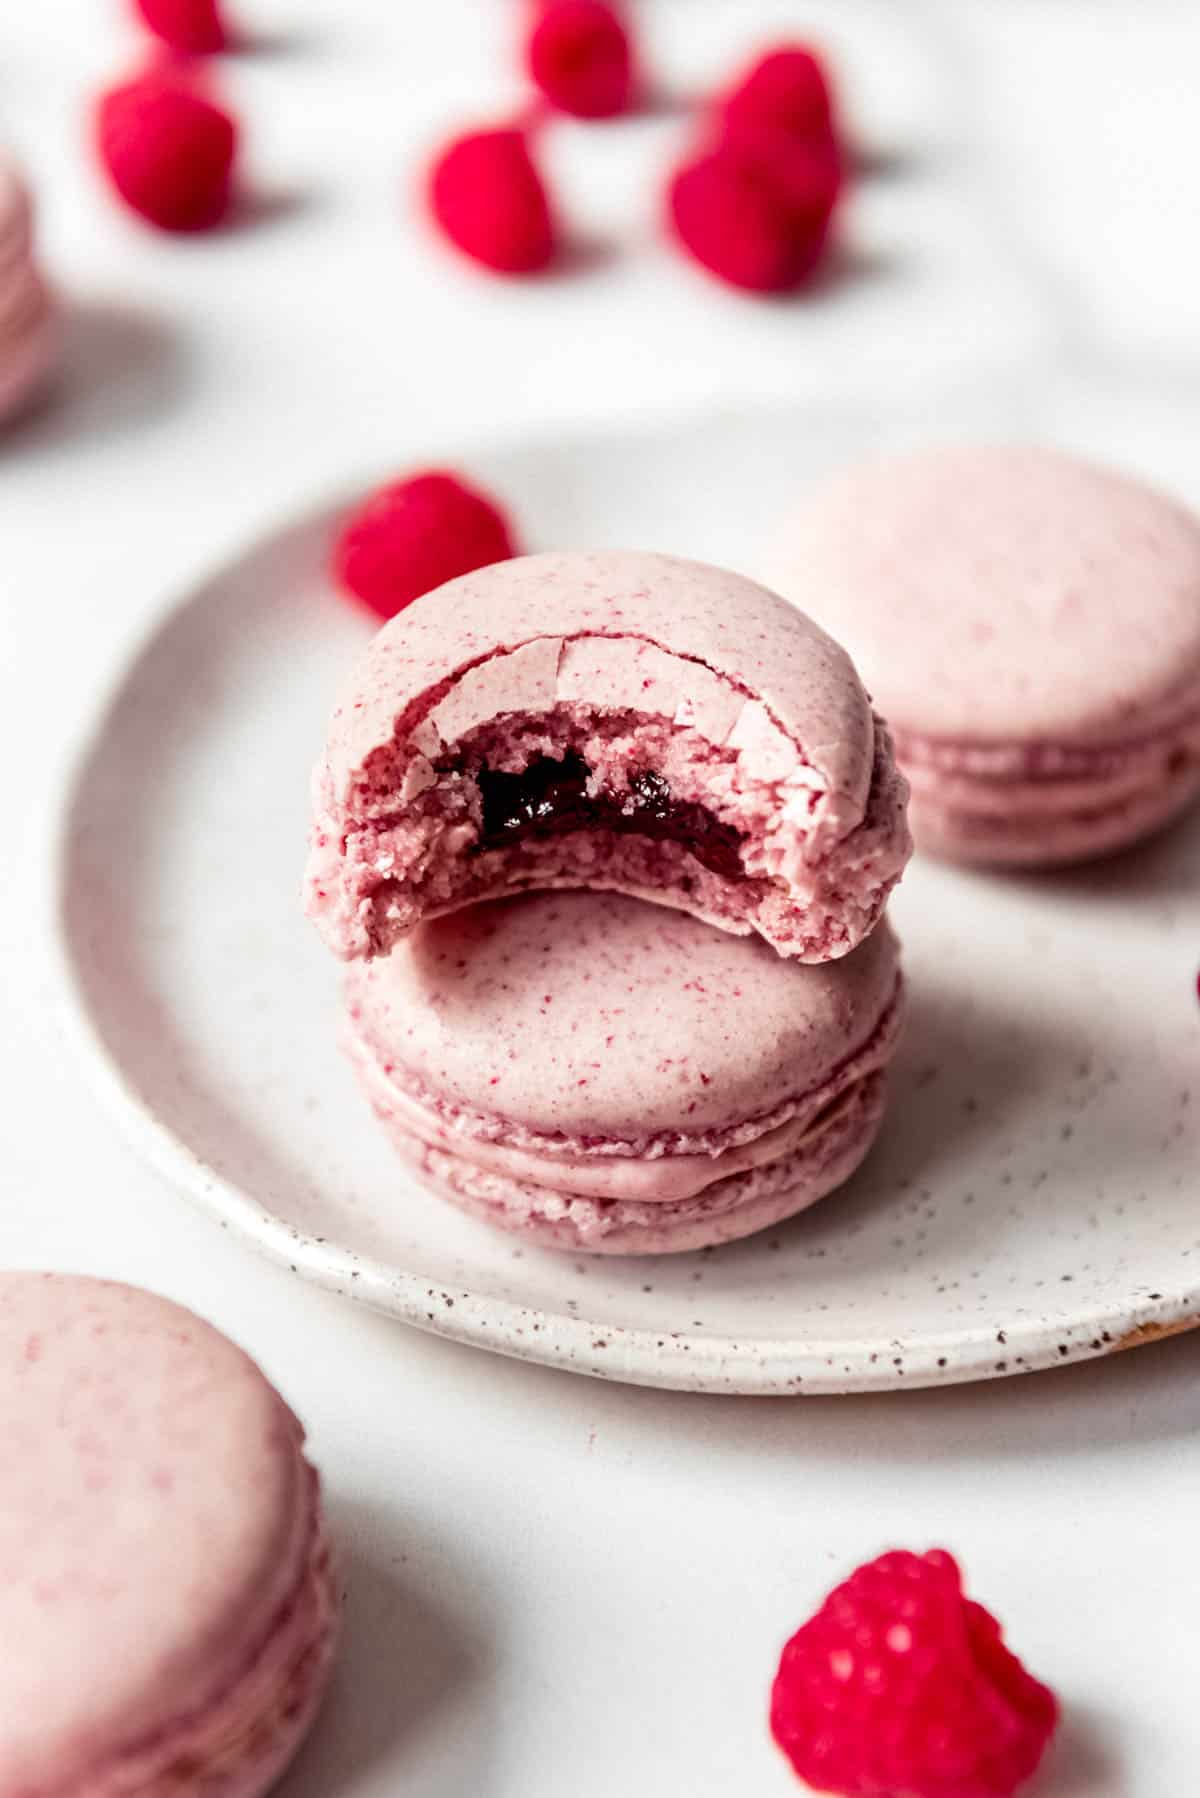 An image of a French macaron with a bite taken out of it to show jam filling in the middle.